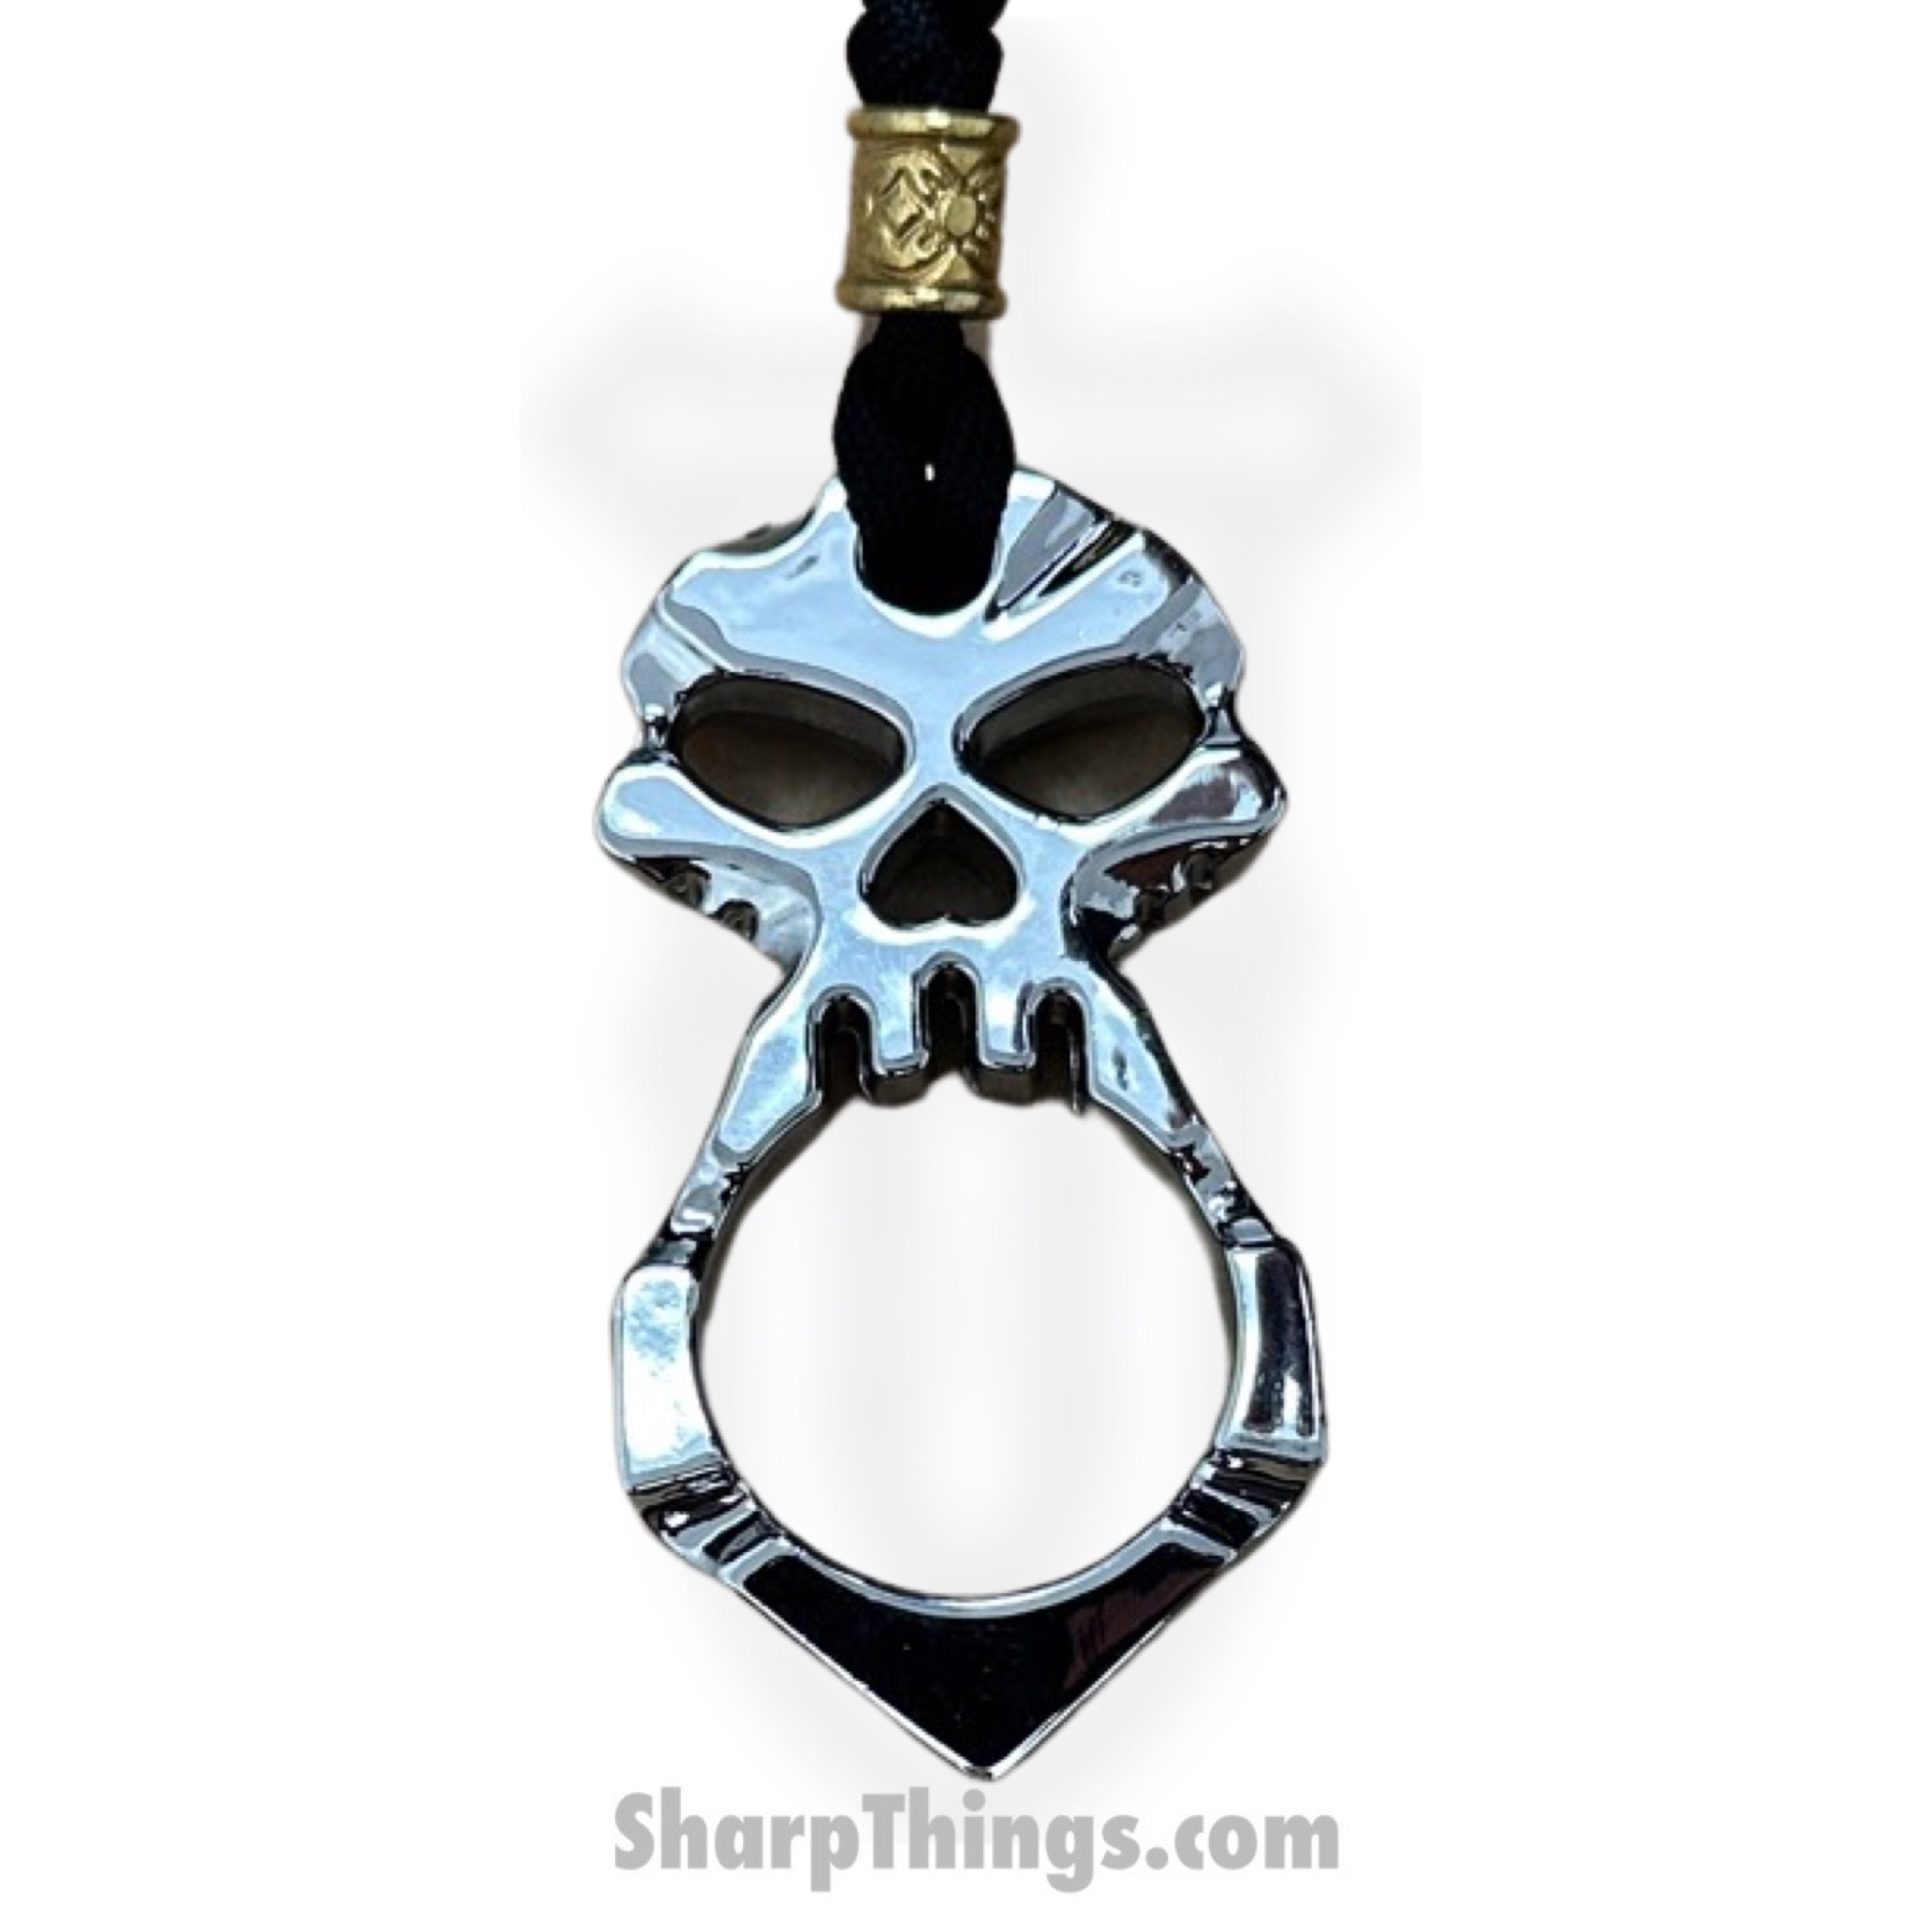 Misc - KN-04-SL-L - Lanyard Necklace One Finger Skull Knuckle Keychain -  Steel - Silver - Sharp Things OKC